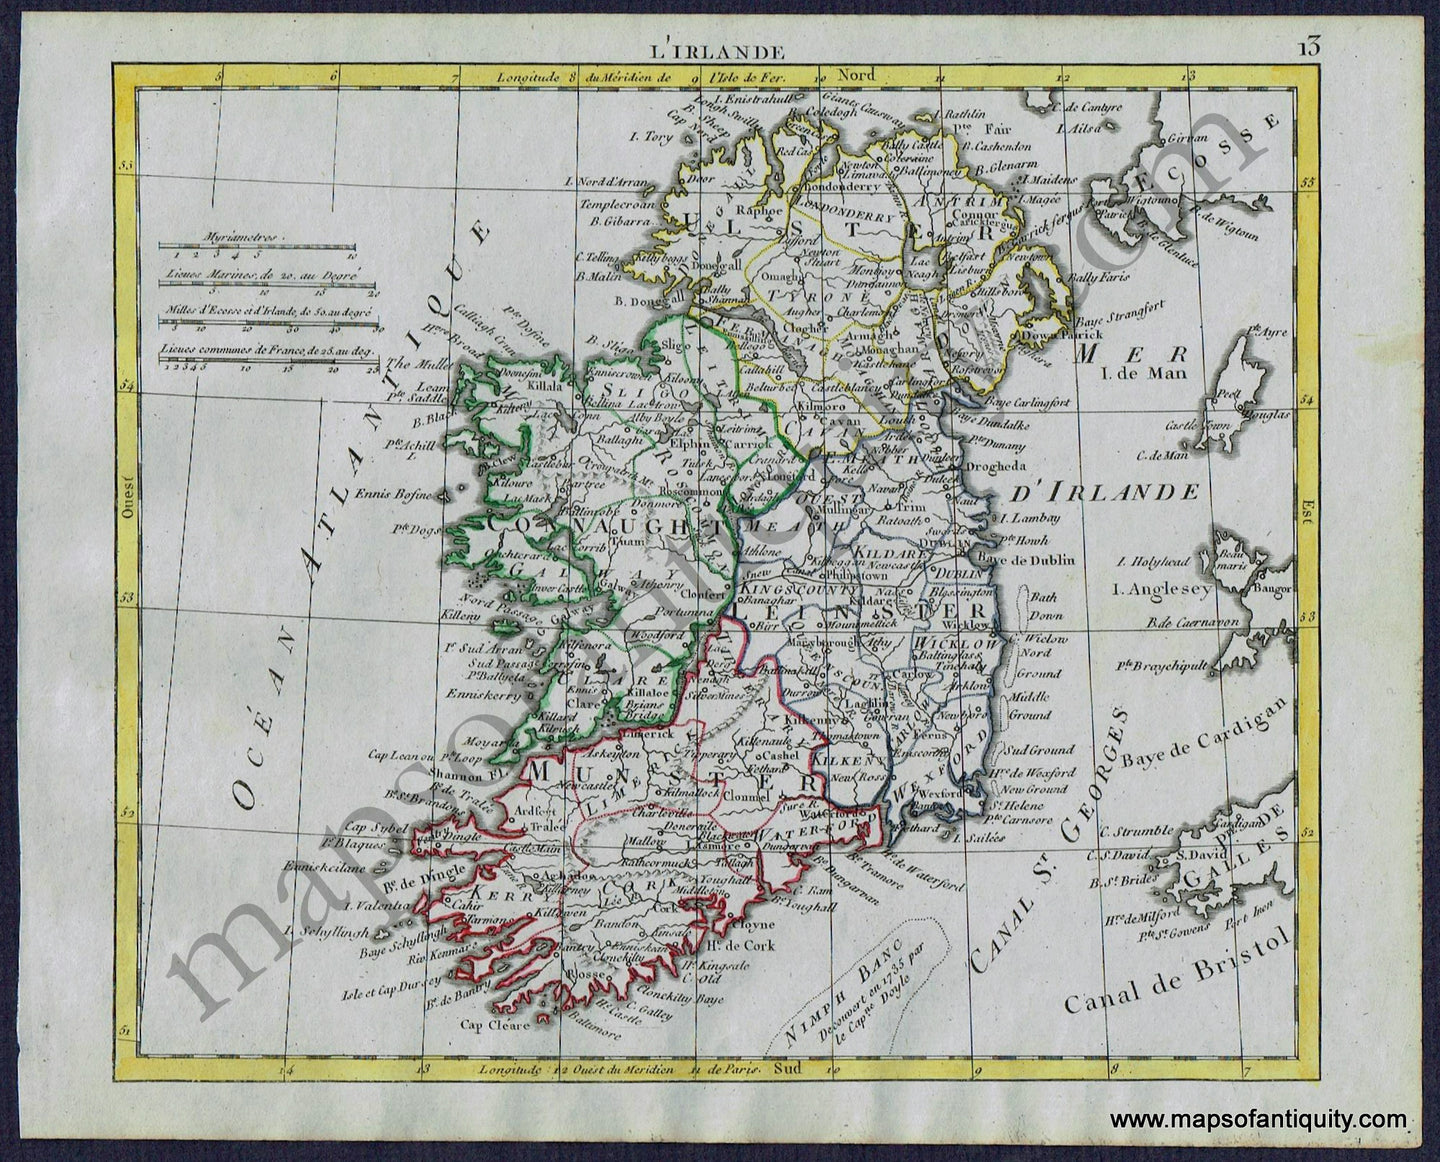 Antique-Map-Ireland-L'Irlande-Herrison-French-1806-1800s-Early-19th-Century-Maps-of-Antiquity